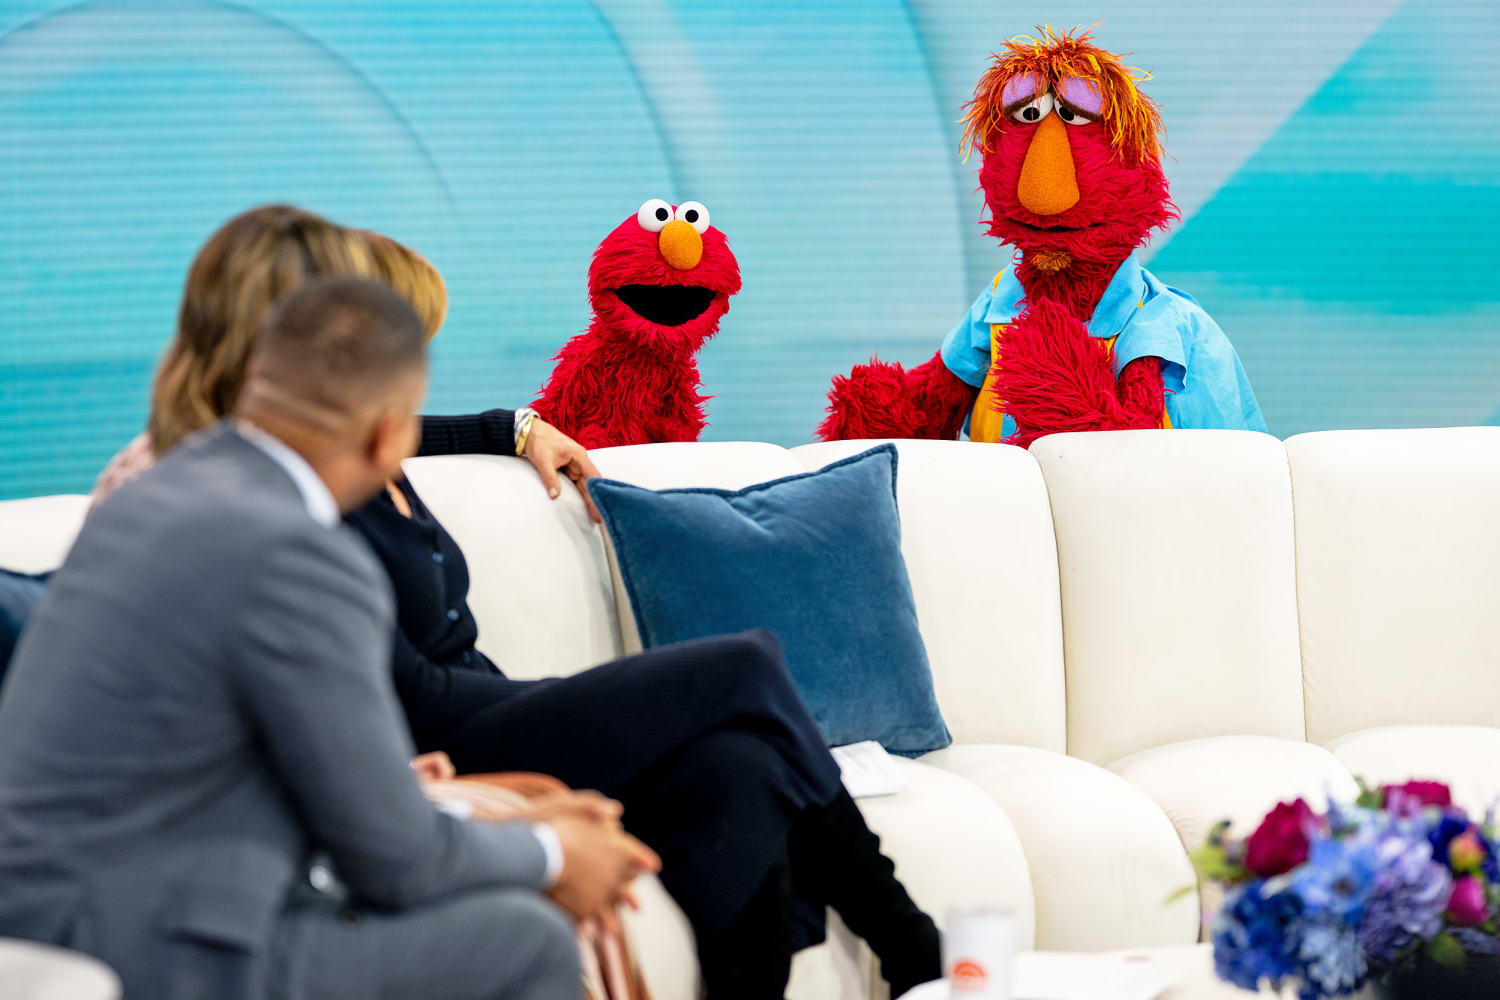 Everything we know about Louie, Elmo's multitalented, goateed dad